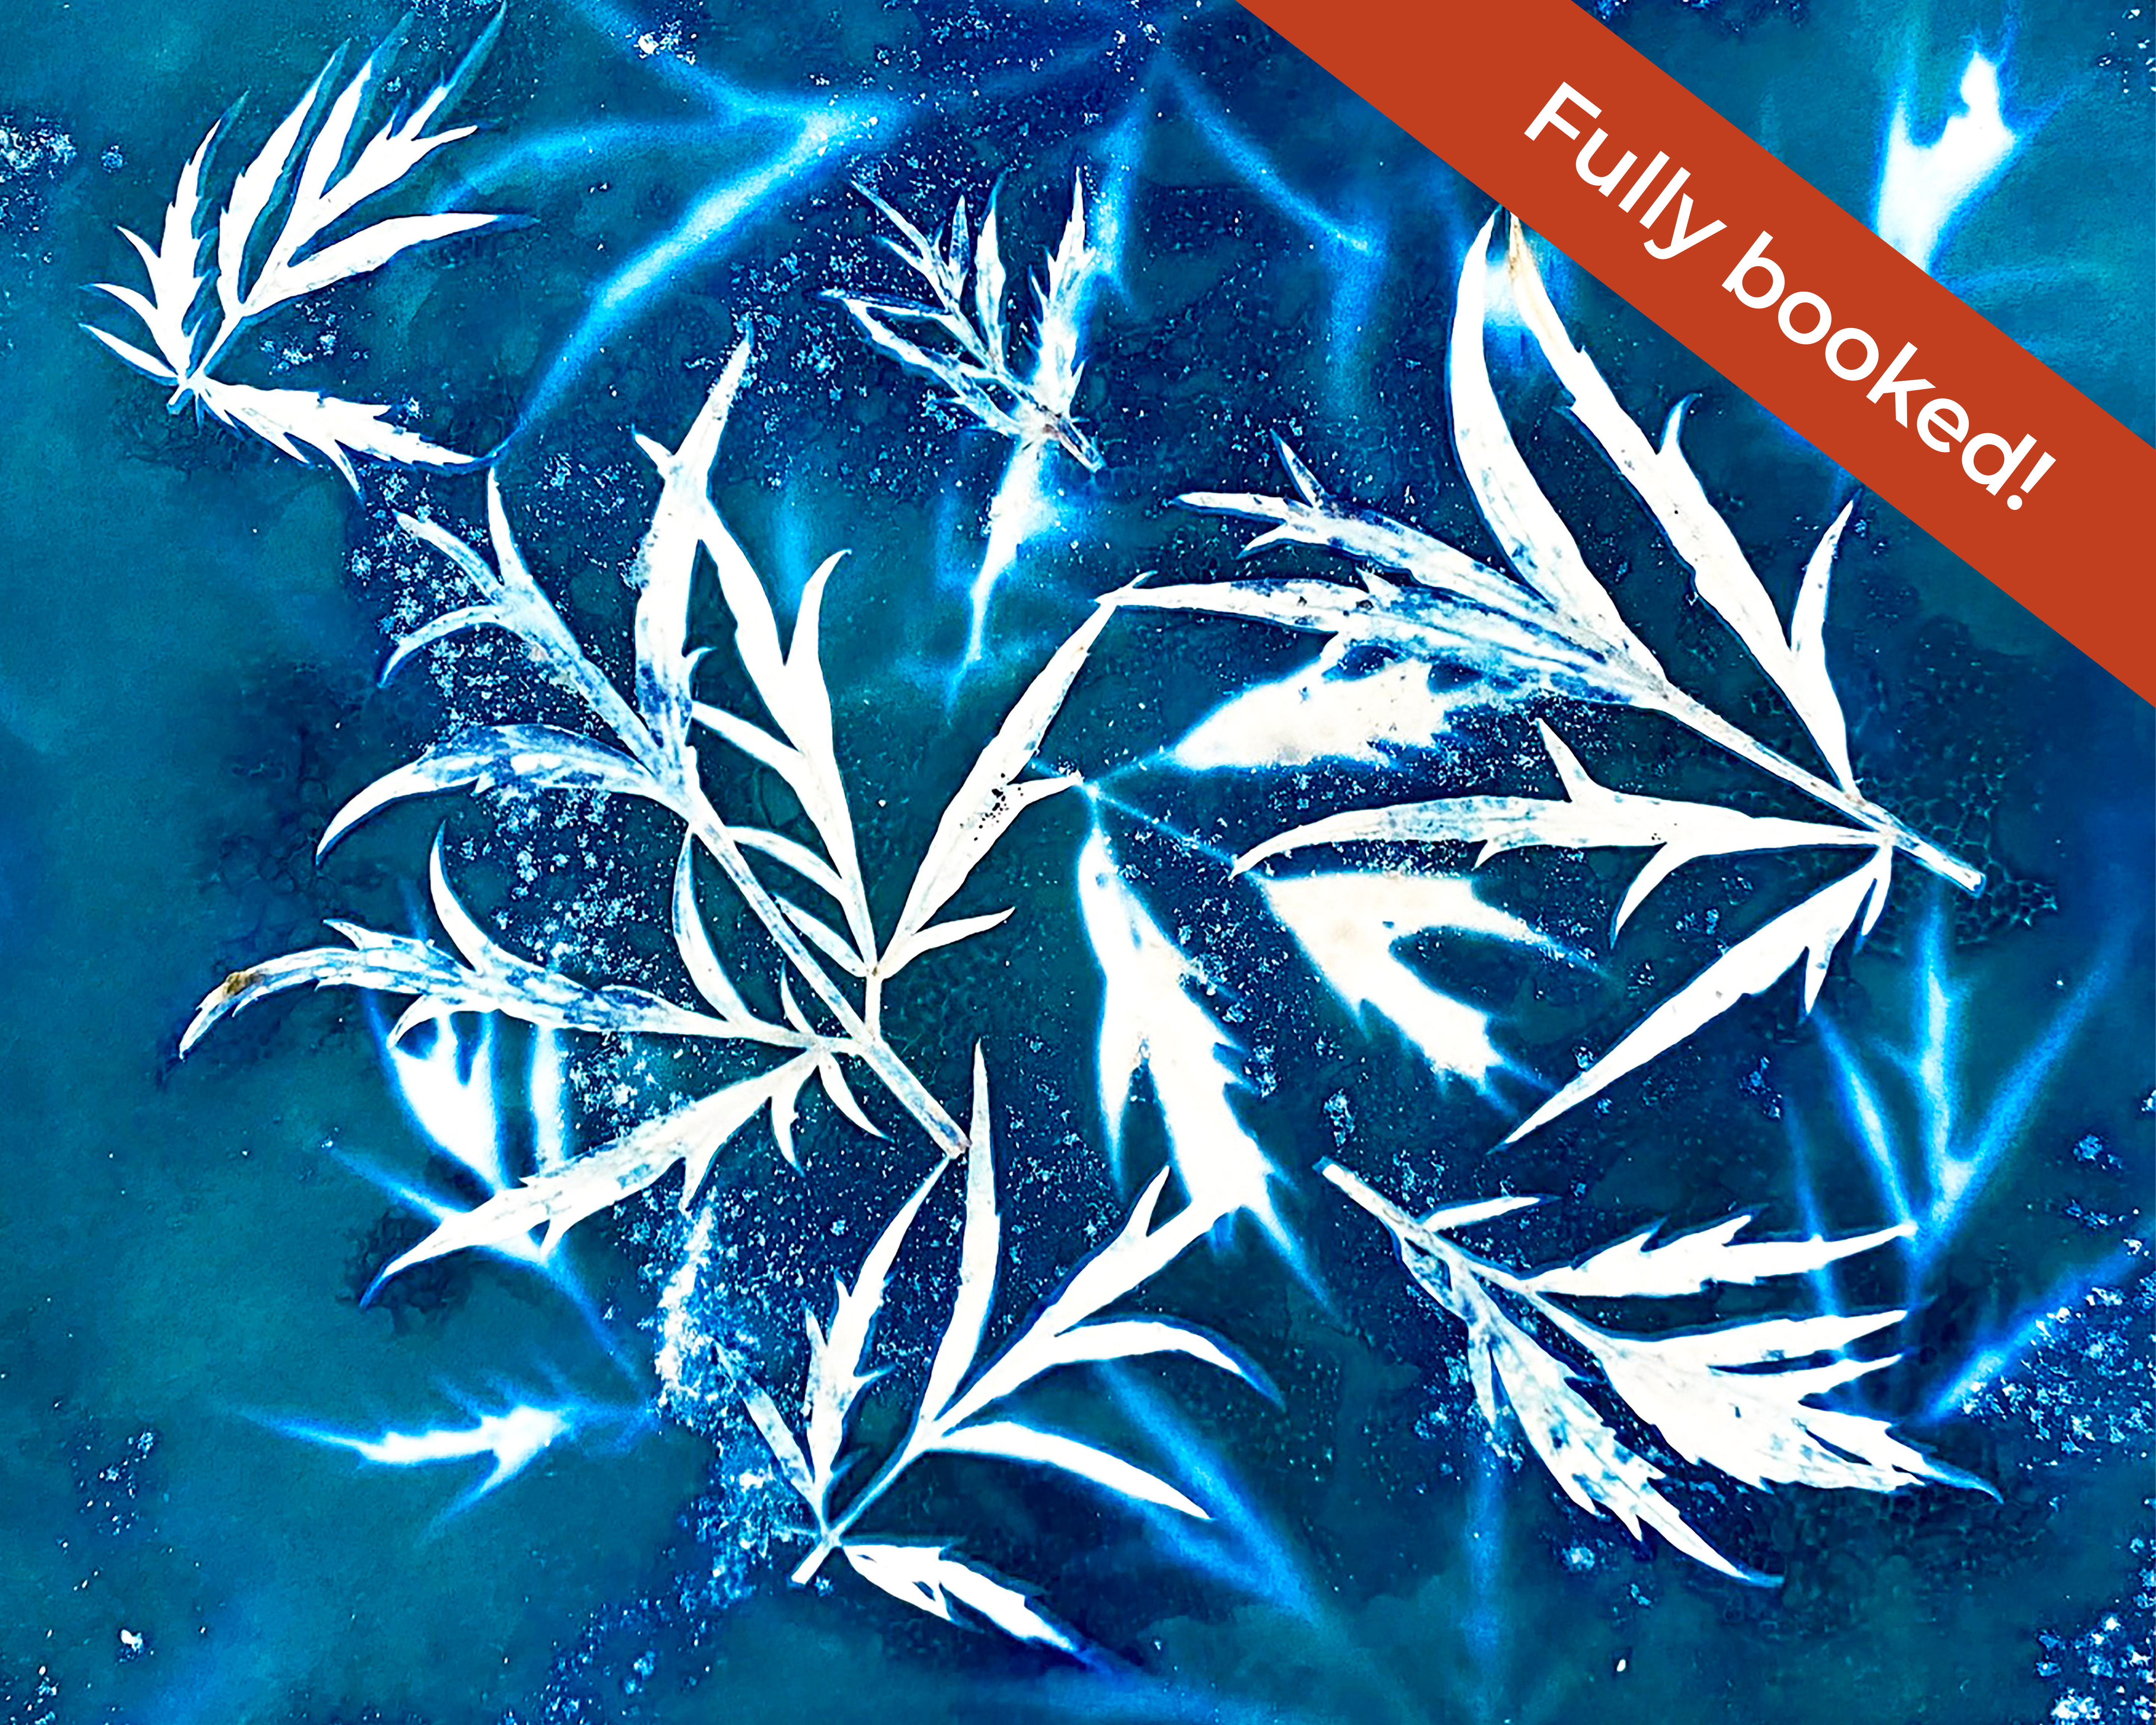 An image of a cyanotype print of elderflower leaves. There is an overlayed red banner on the top right corner which reads: Fully booked!